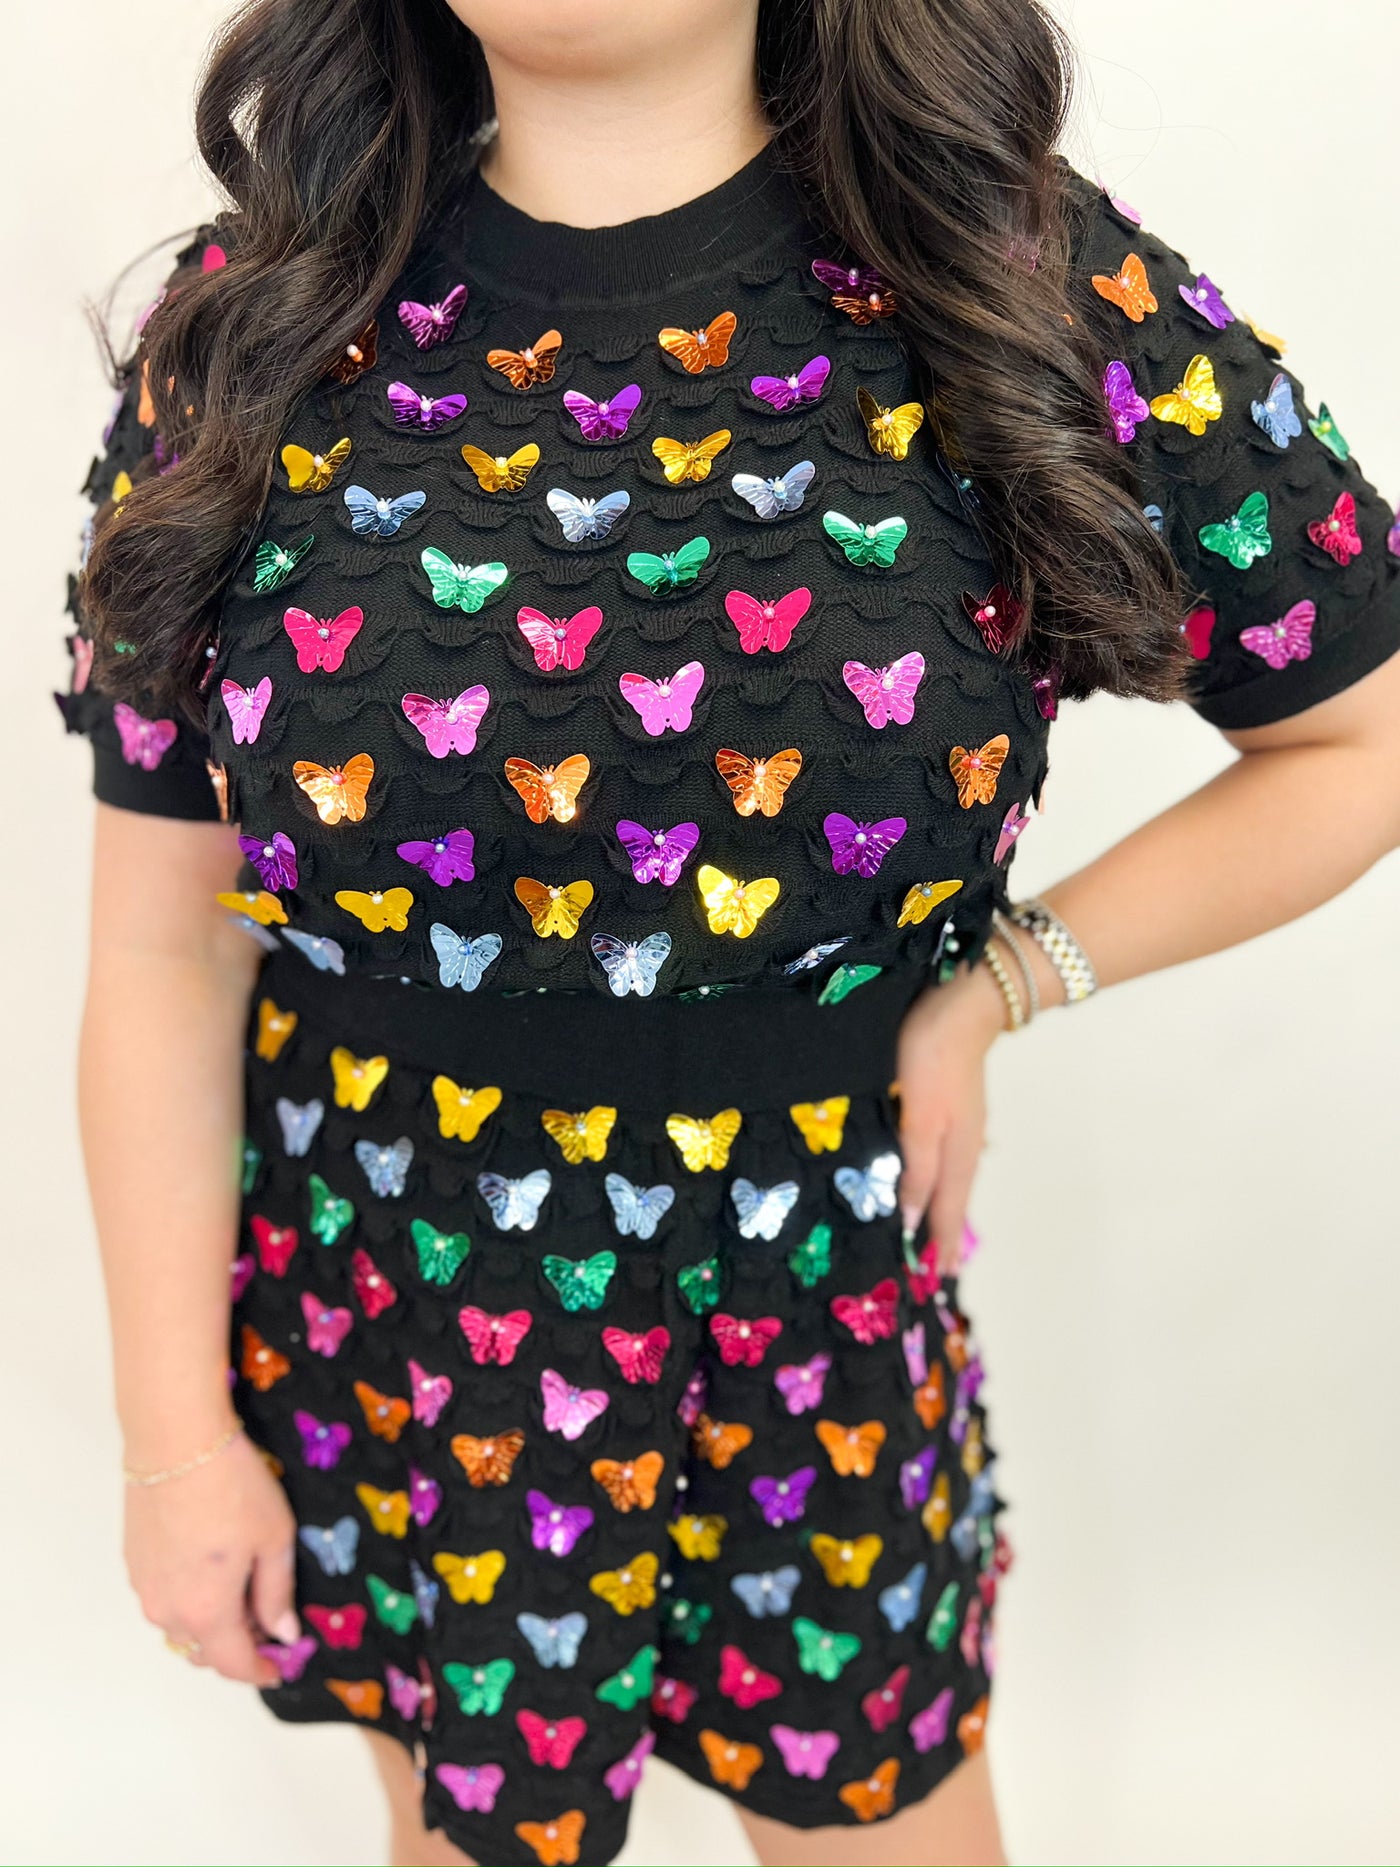 Rainbow Butterfly Top